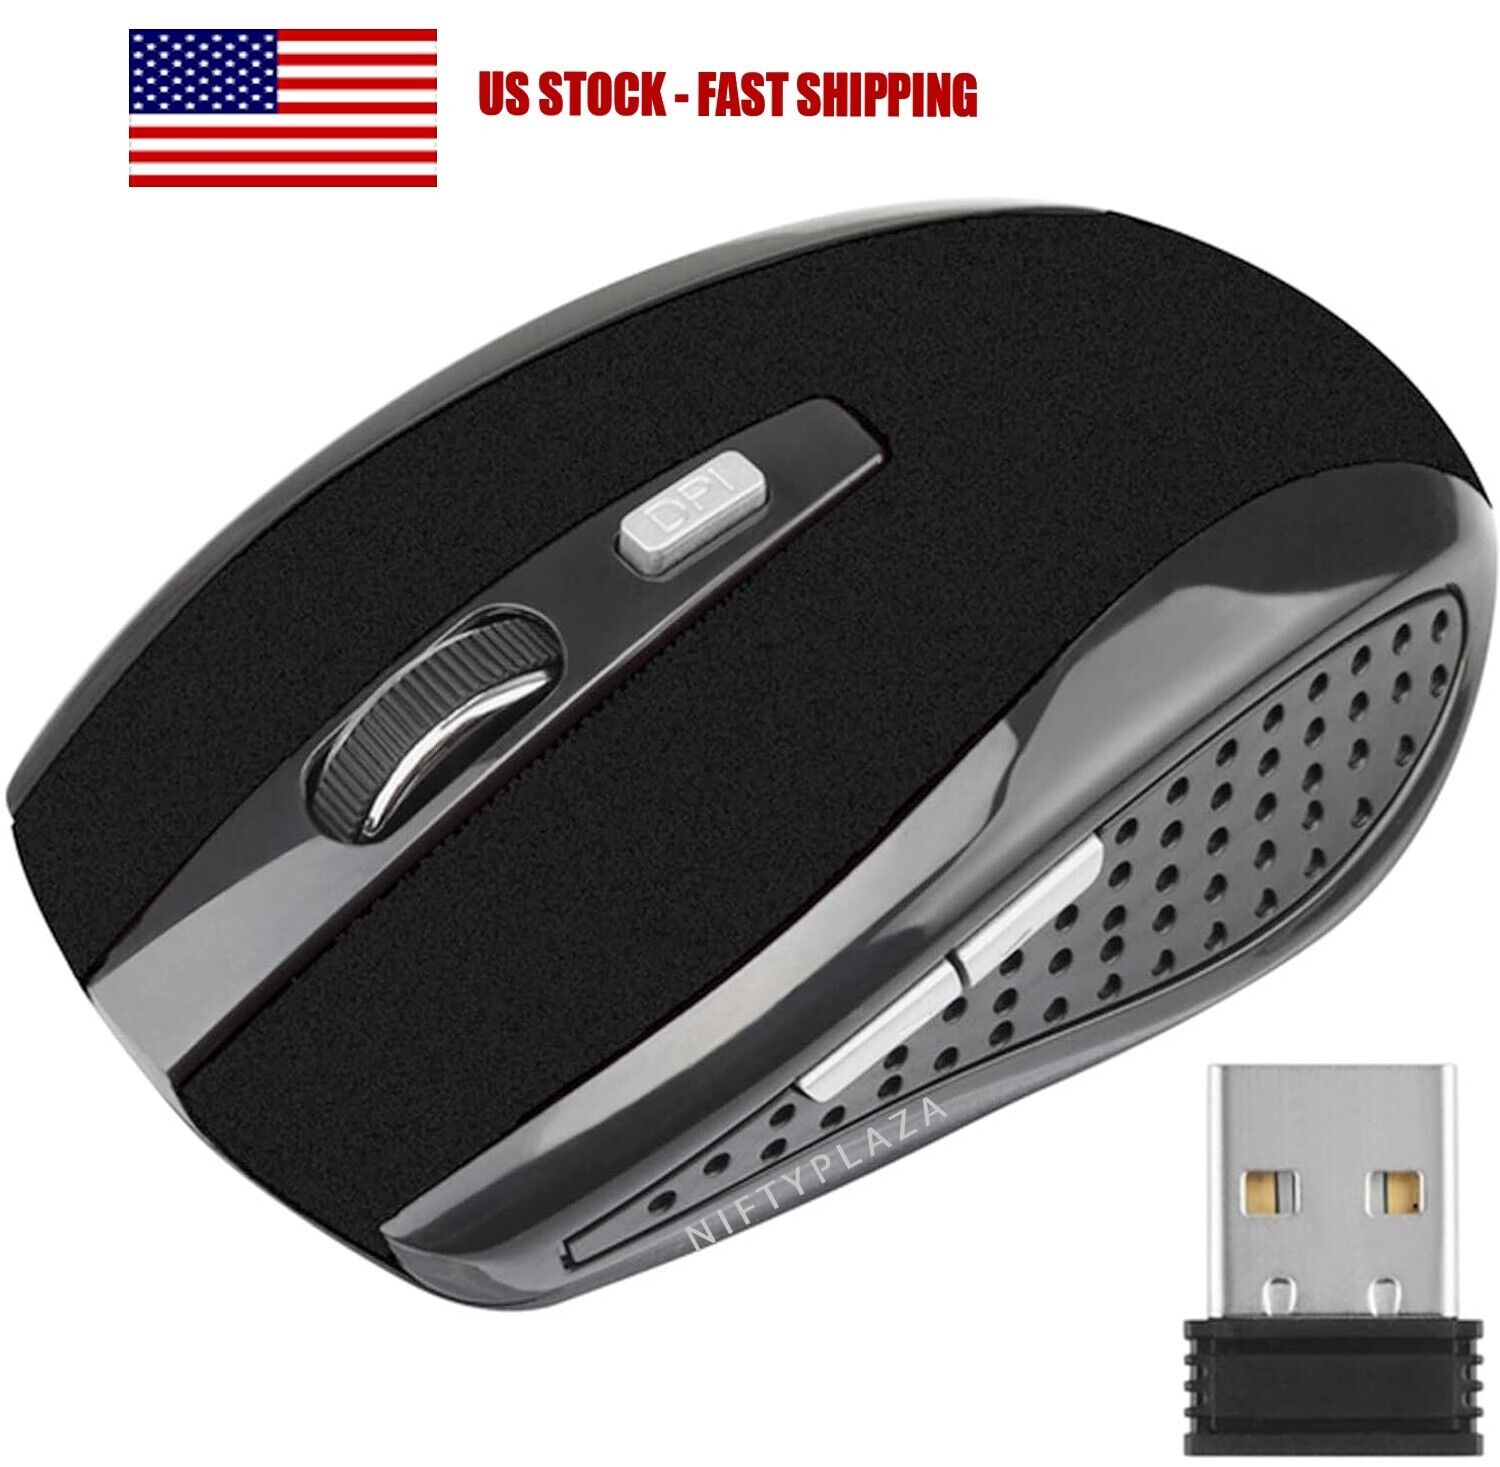 Wireless Optical Gaming Mouse Dual Mode 2.4GHz 1600DPI USB Dongle Mice Laptops